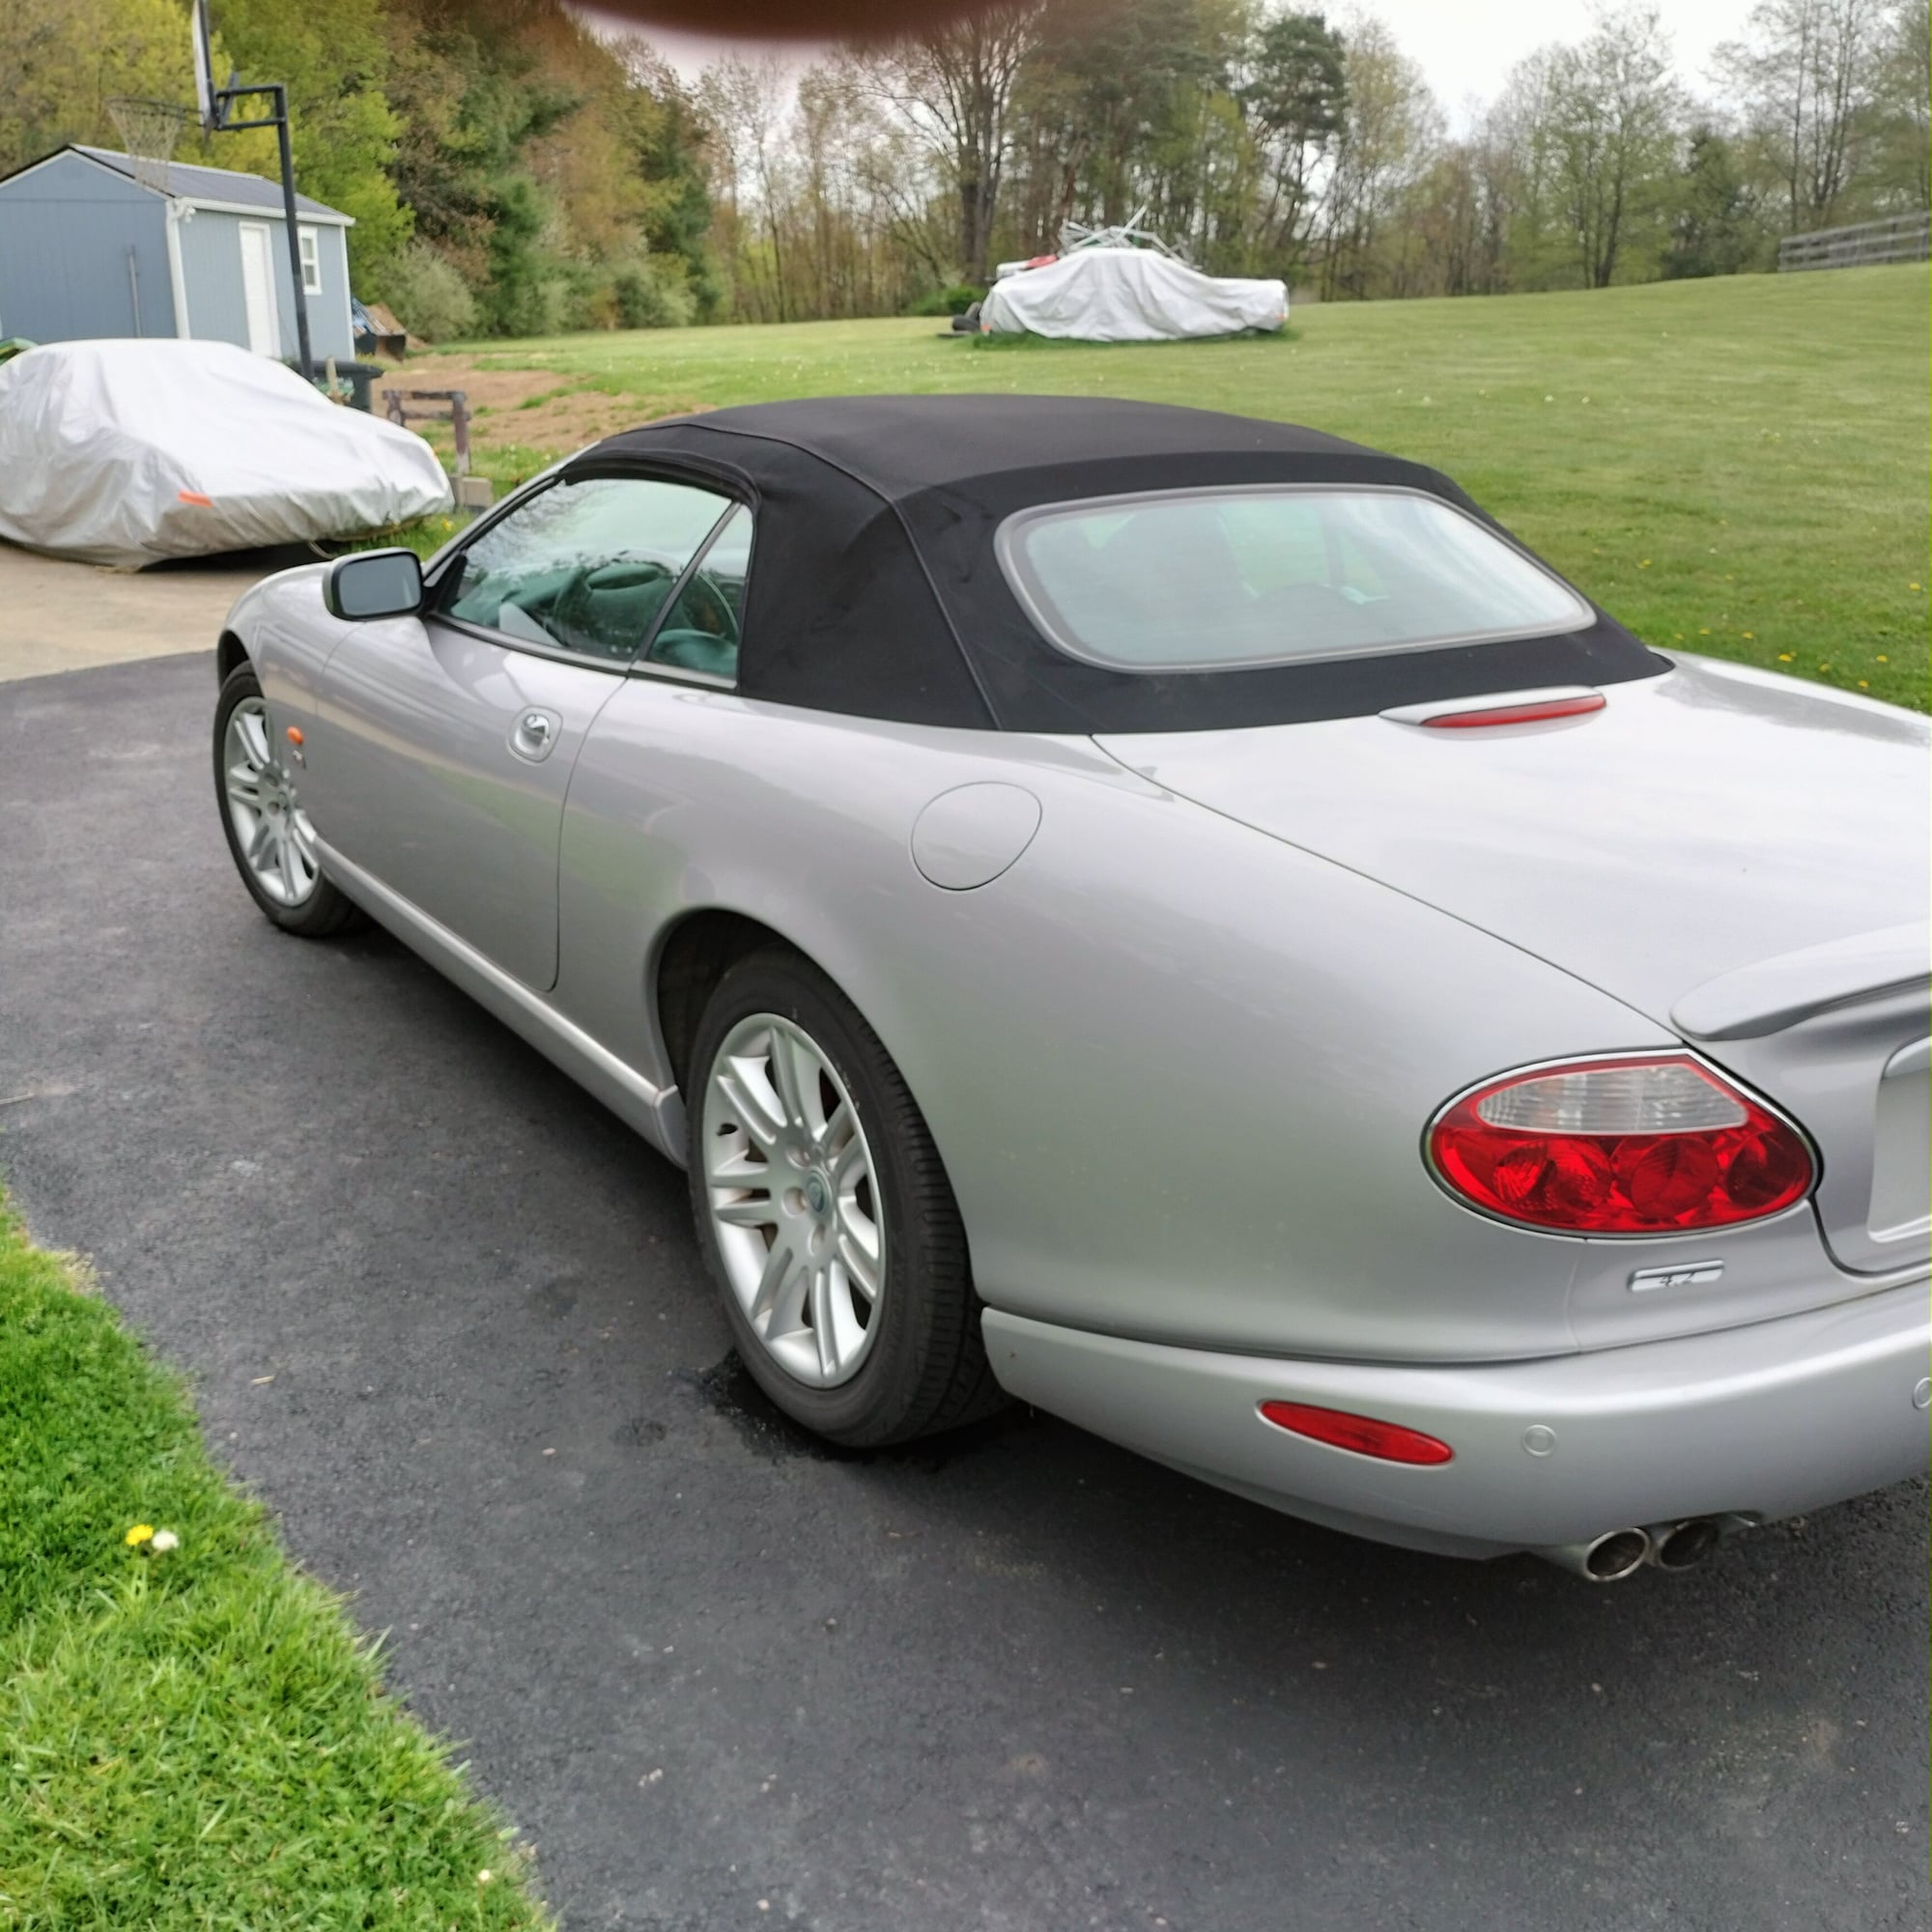 2005 Jaguar XKR - Well maintained 2005 XKR - Used - VIN SAJDA42B353A43004 - 92,500 Miles - 8 cyl - 2WD - Automatic - Convertible - Silver - Cleveland Area, OH 44266, United States